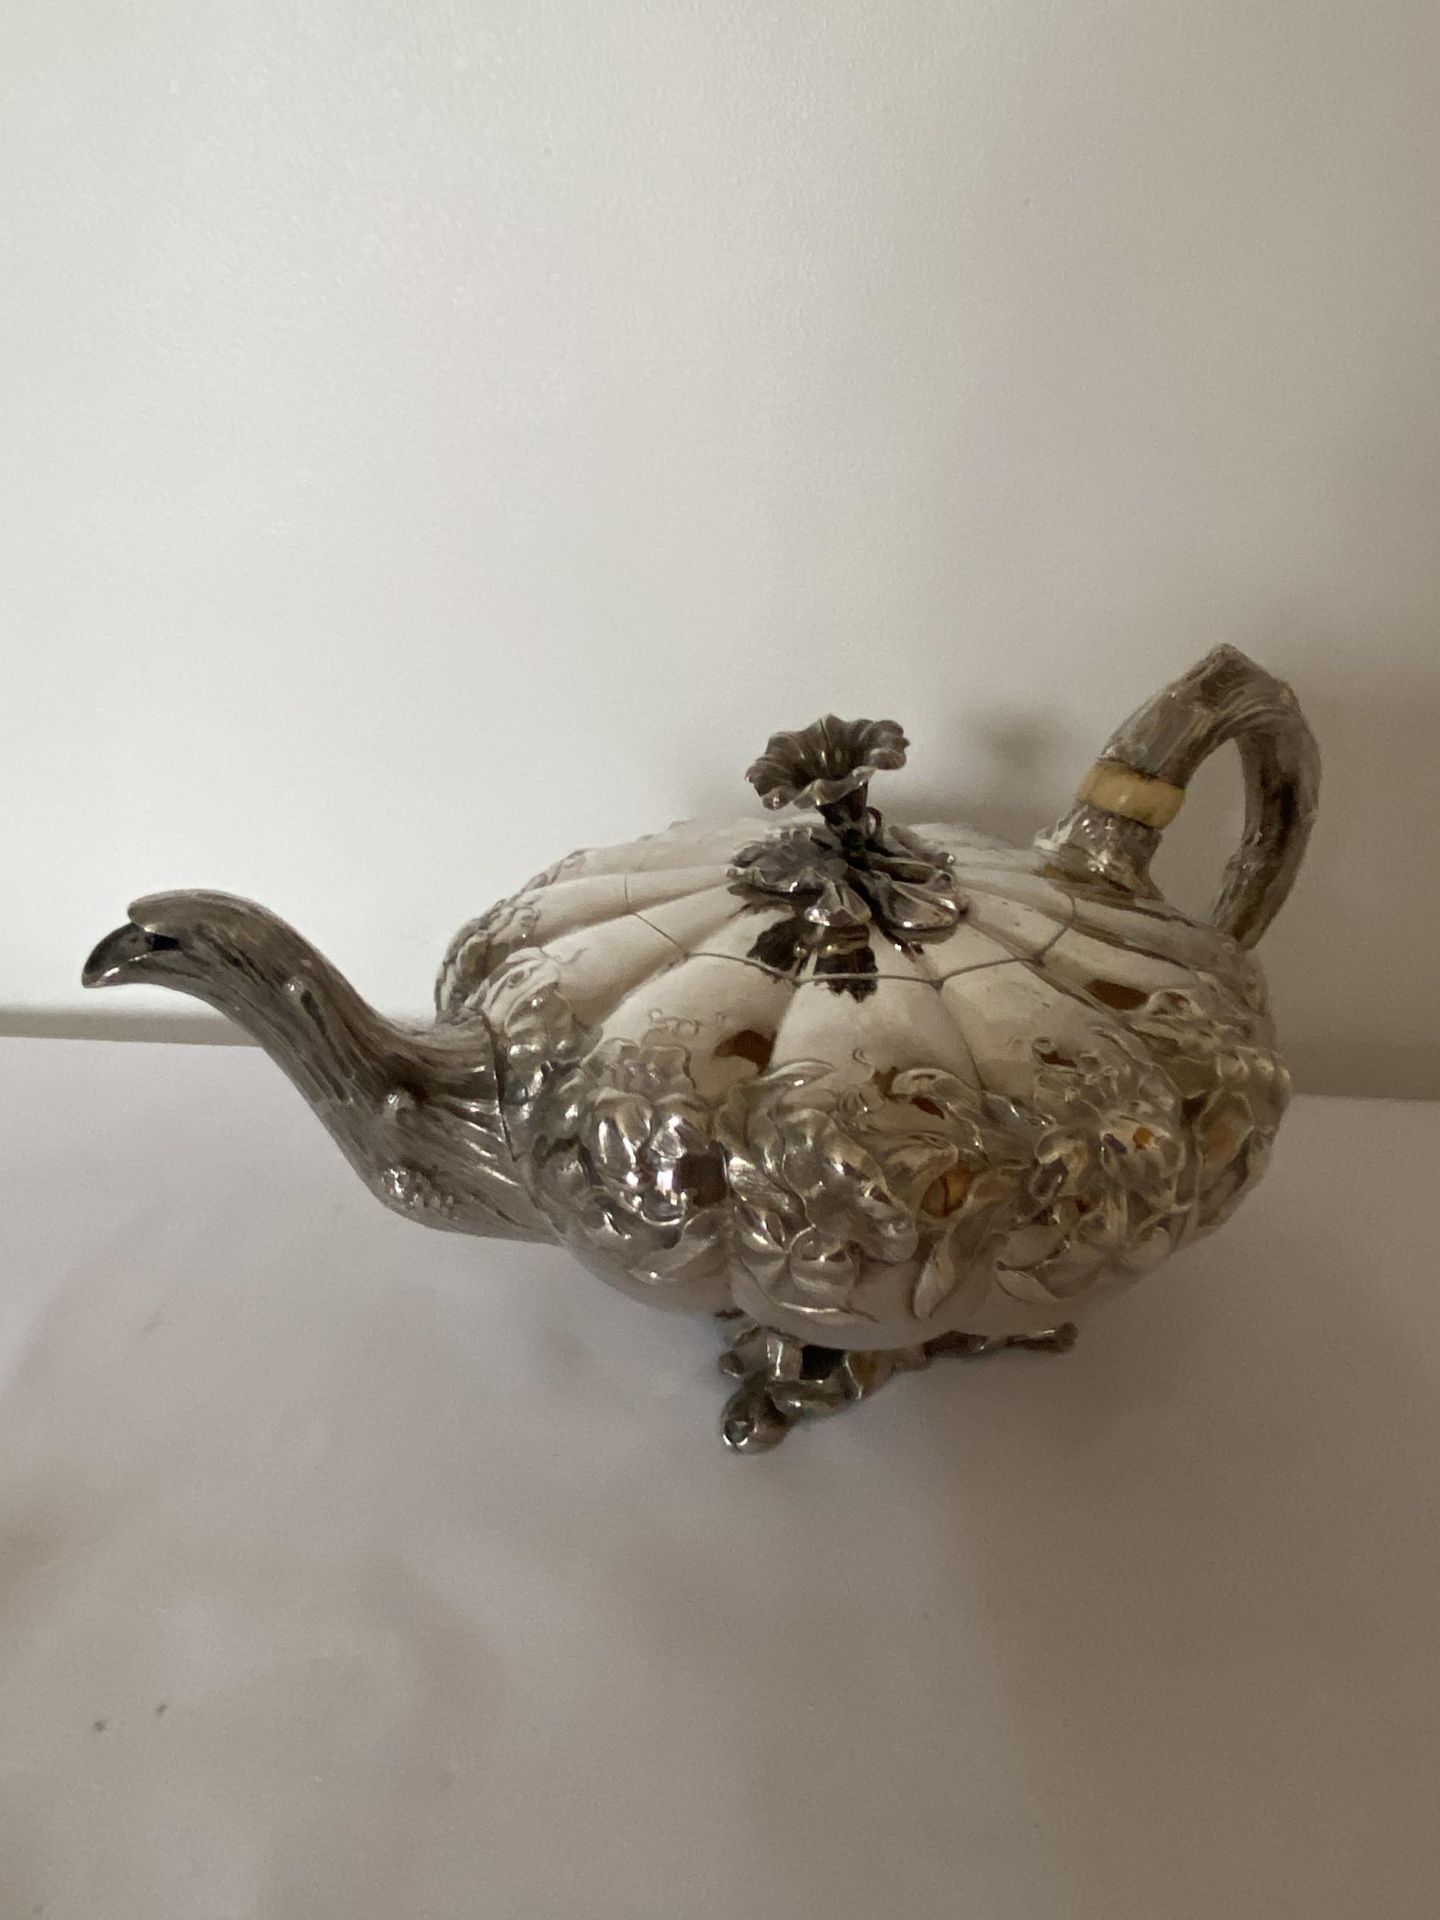 A VICTORIAN 1840 HALLMARKED LONDON SILVER TEAPOT, MAKER WC, POSSIBLY WILLIAM CHANDLESS, GROSS WEIGHT - Image 6 of 21